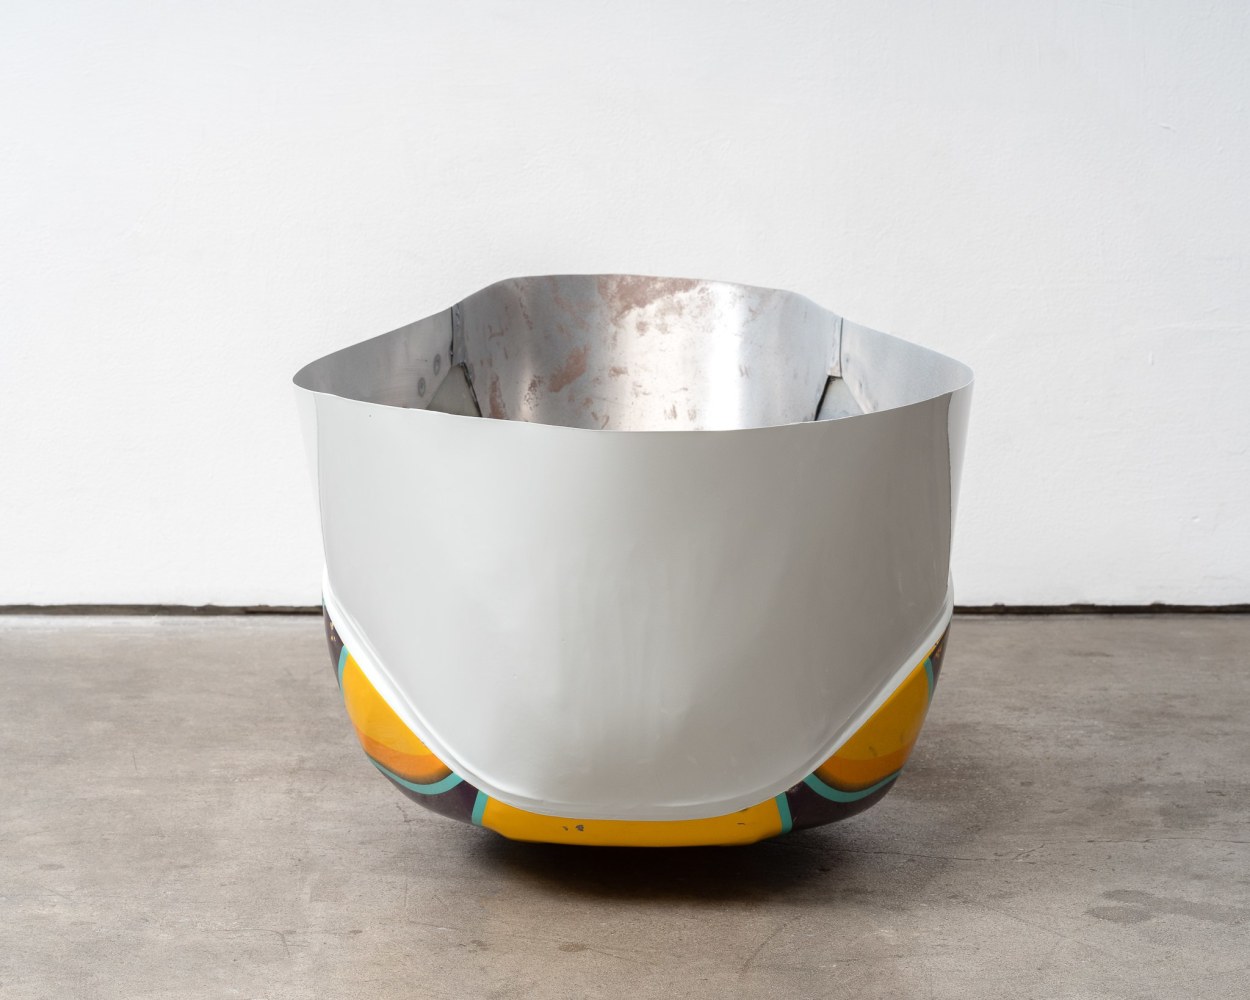 Elad Lassry

Untitled (Carrier, Yellow)

2019

Welded and painted steel

32 1/4 x 19 1/2 x 15 inches (81.9 x 49.5 x 38.1 cm)

Unique

EL 514

$35,000

&amp;nbsp;

INQUIRE